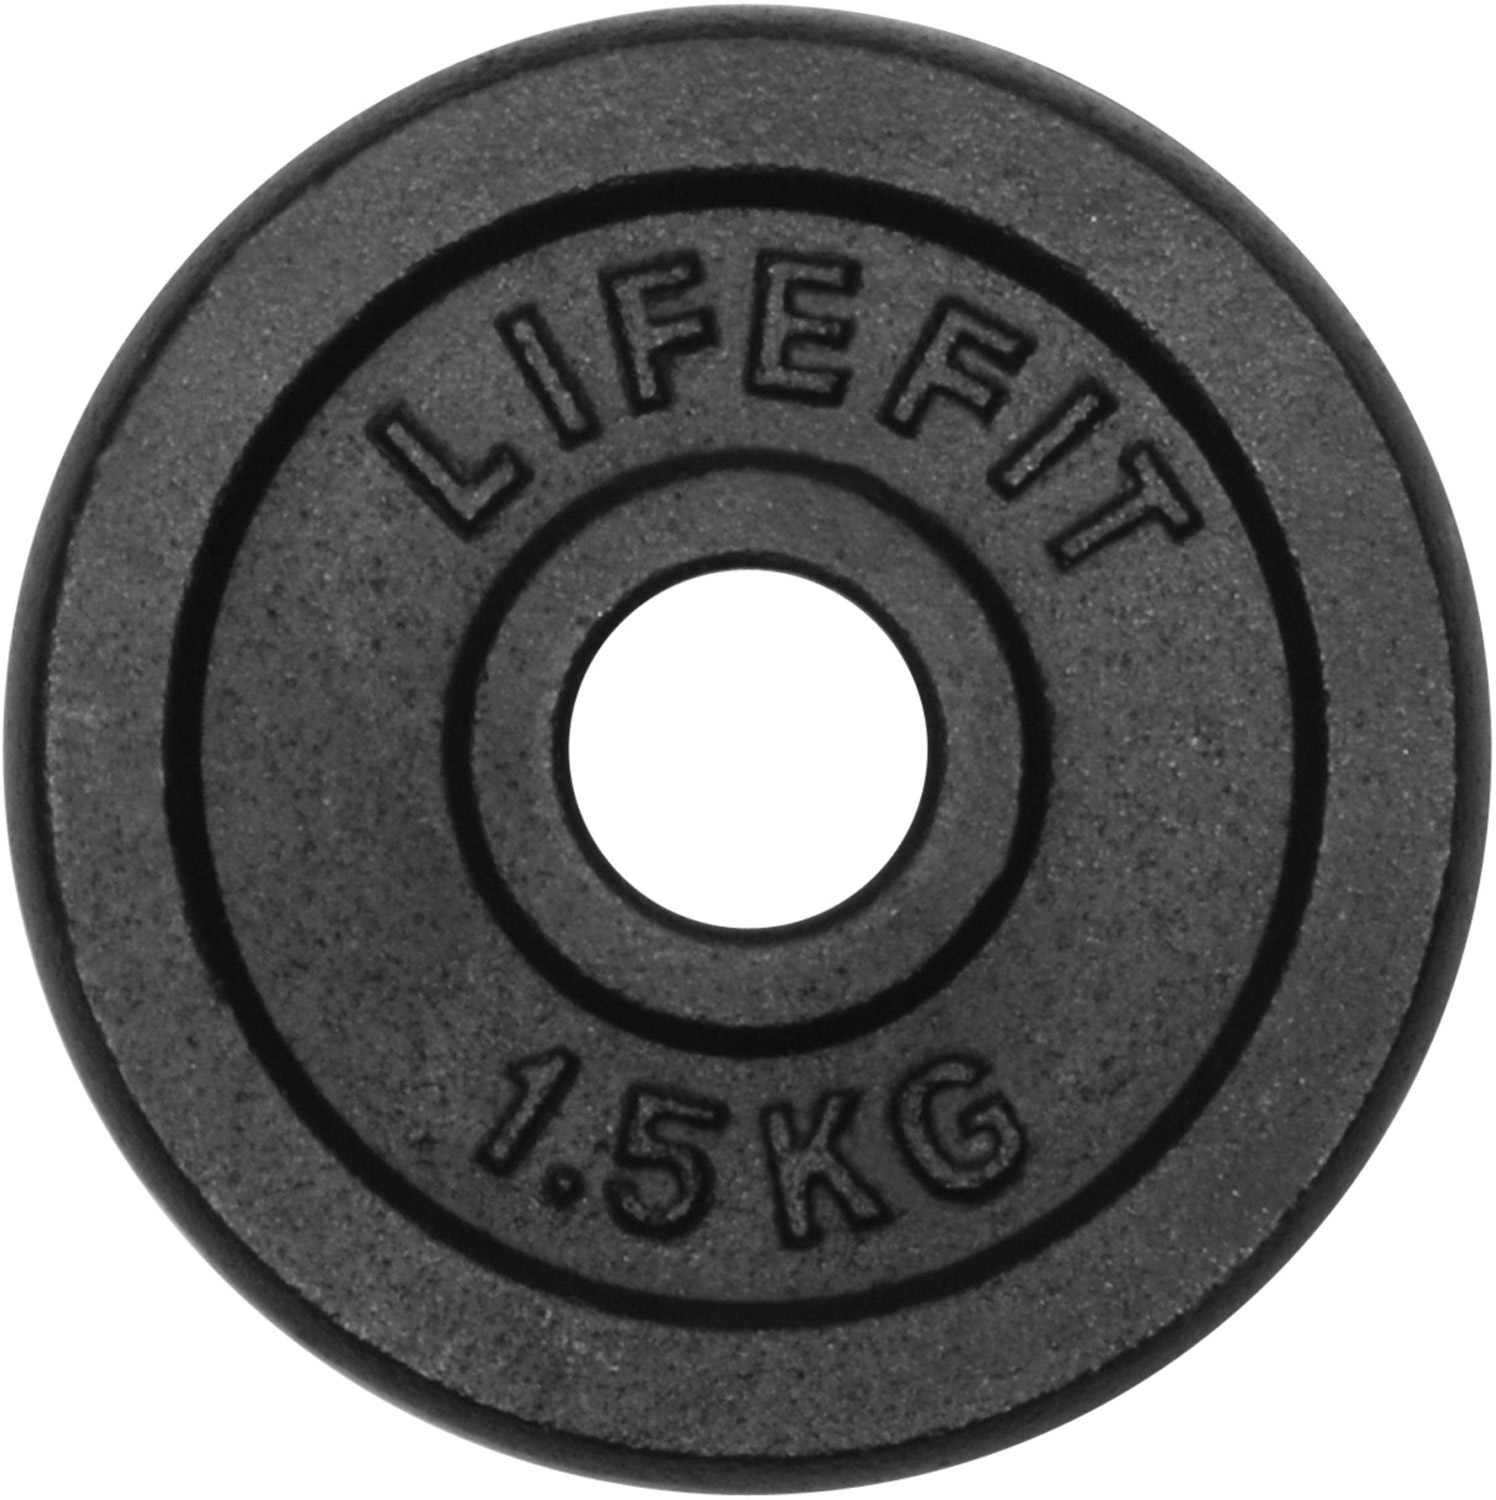 Weight disc plate